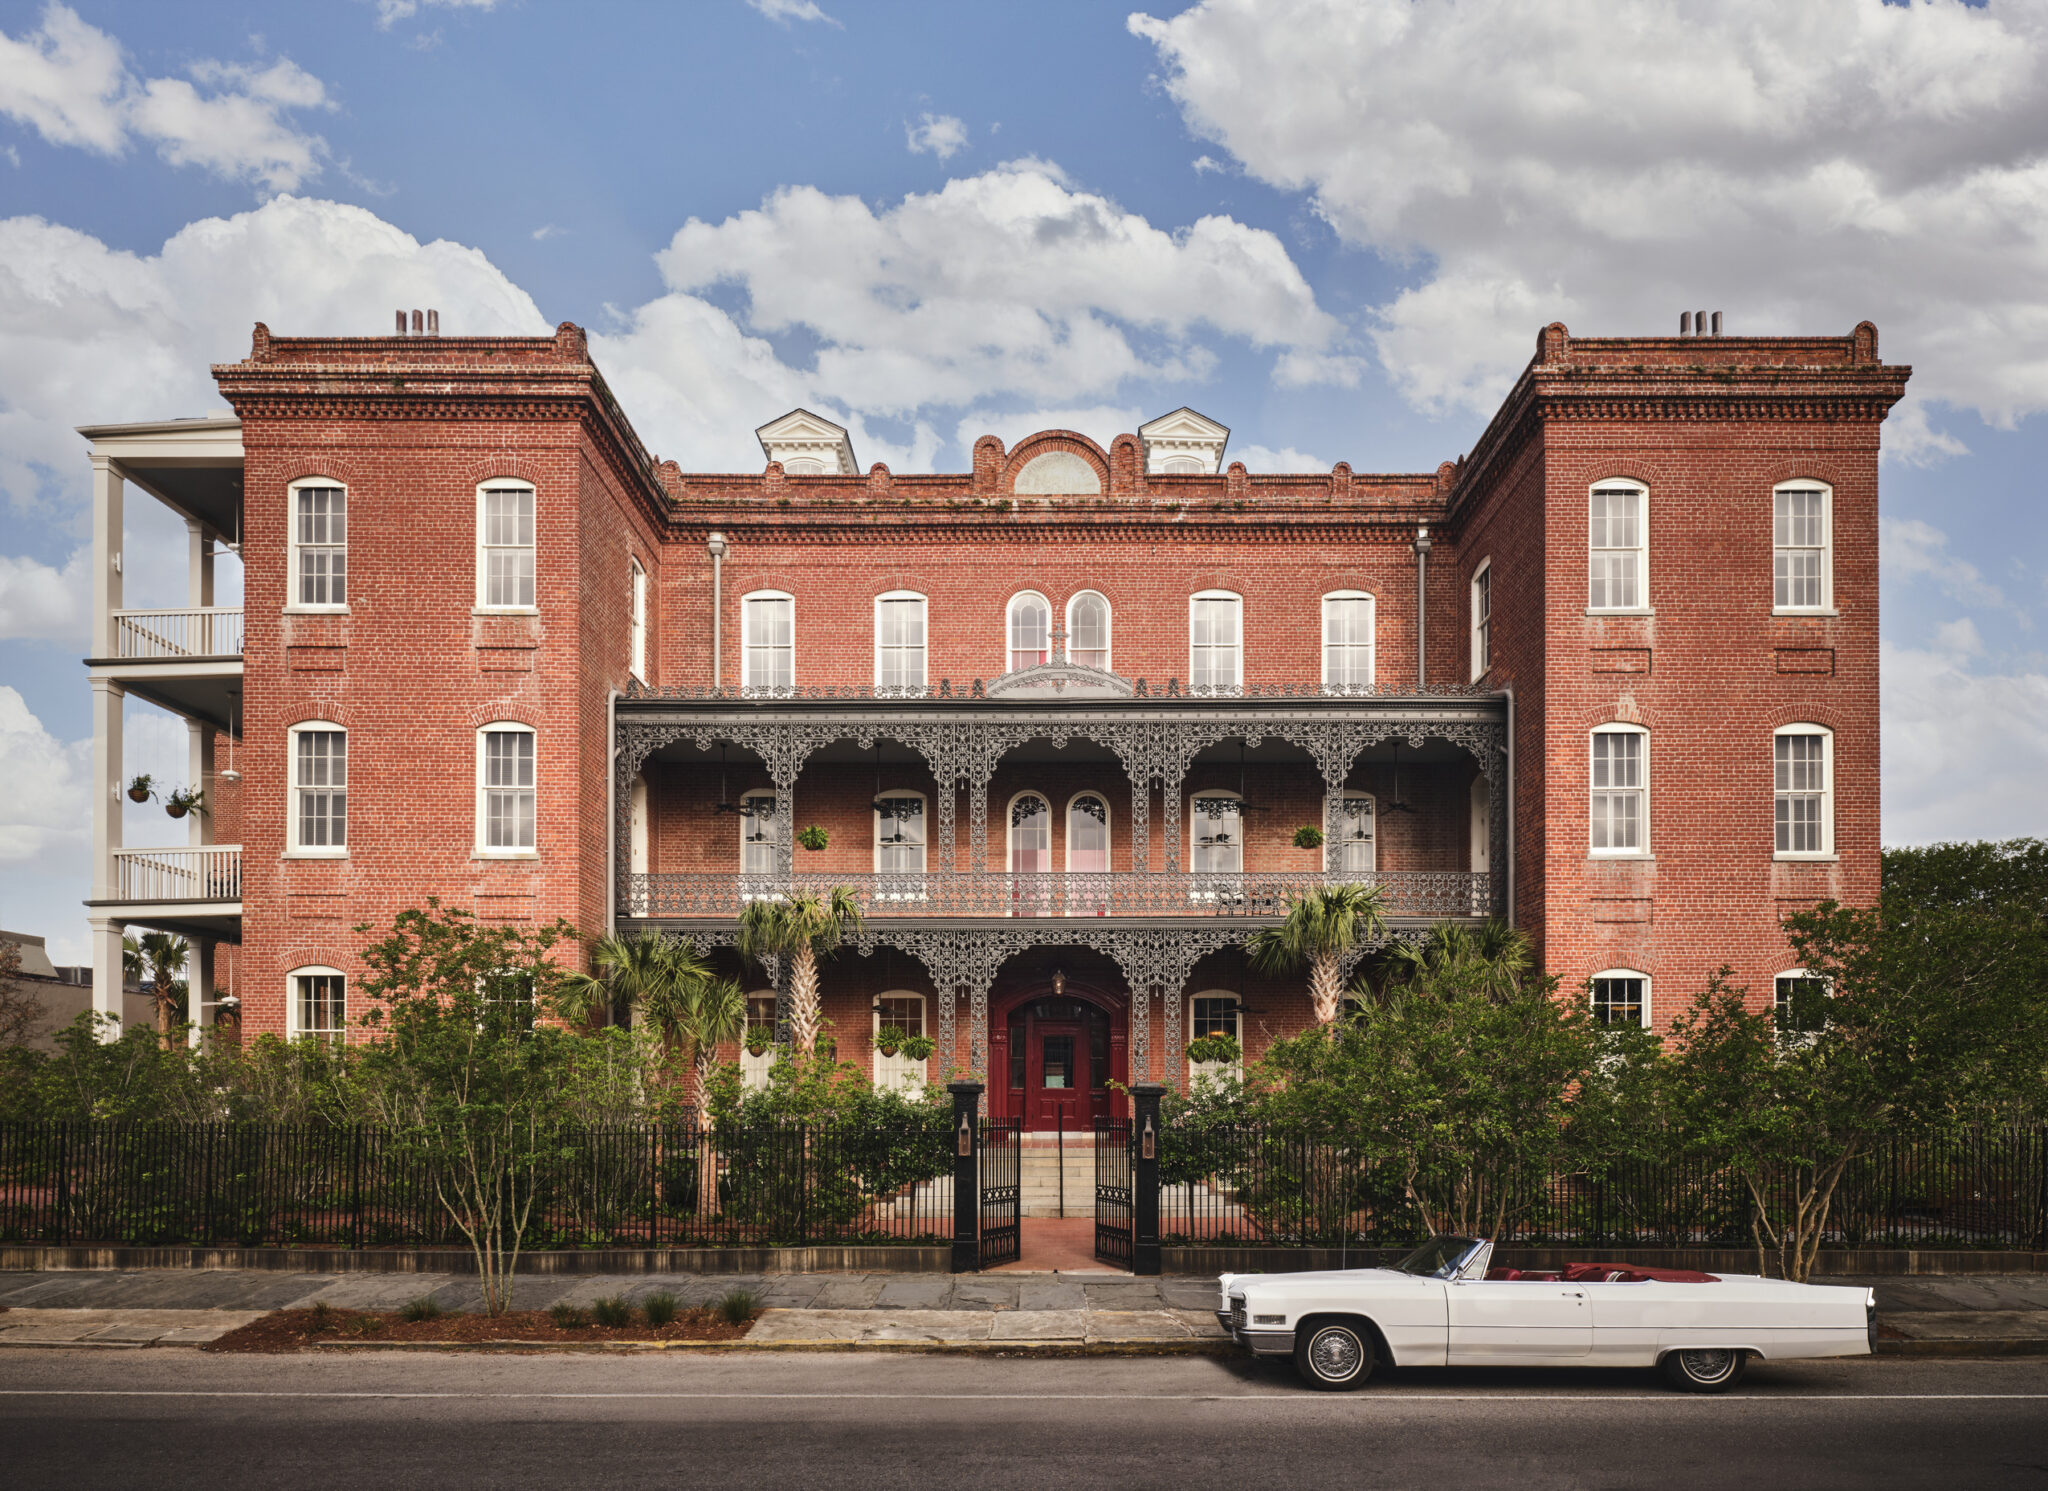 This Design-Forward Hotel in New Orleans May Be the City’s Most Photogenic